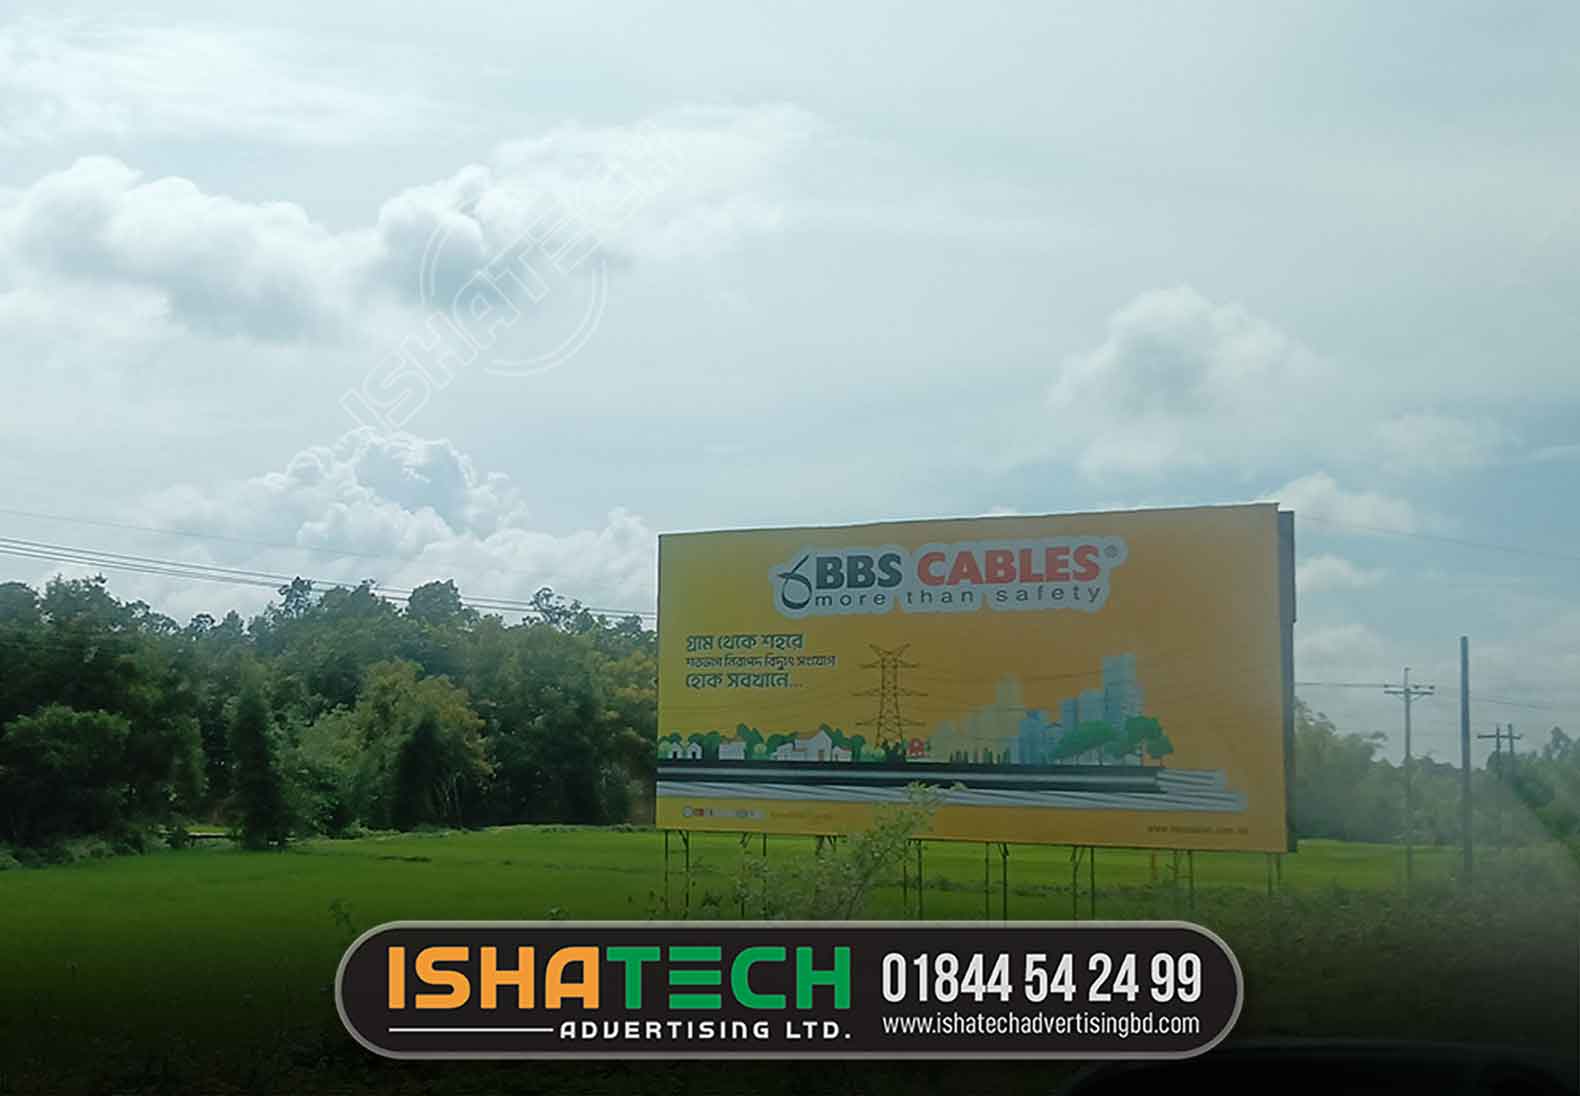 BBS CABLES OUTDOOR BILLBOARD ADVERTISING, BBS Cables Brand & Communication Strategy, Outdoor Digital TV Advertising Screens, Signs & Billboards, Electronic billboard